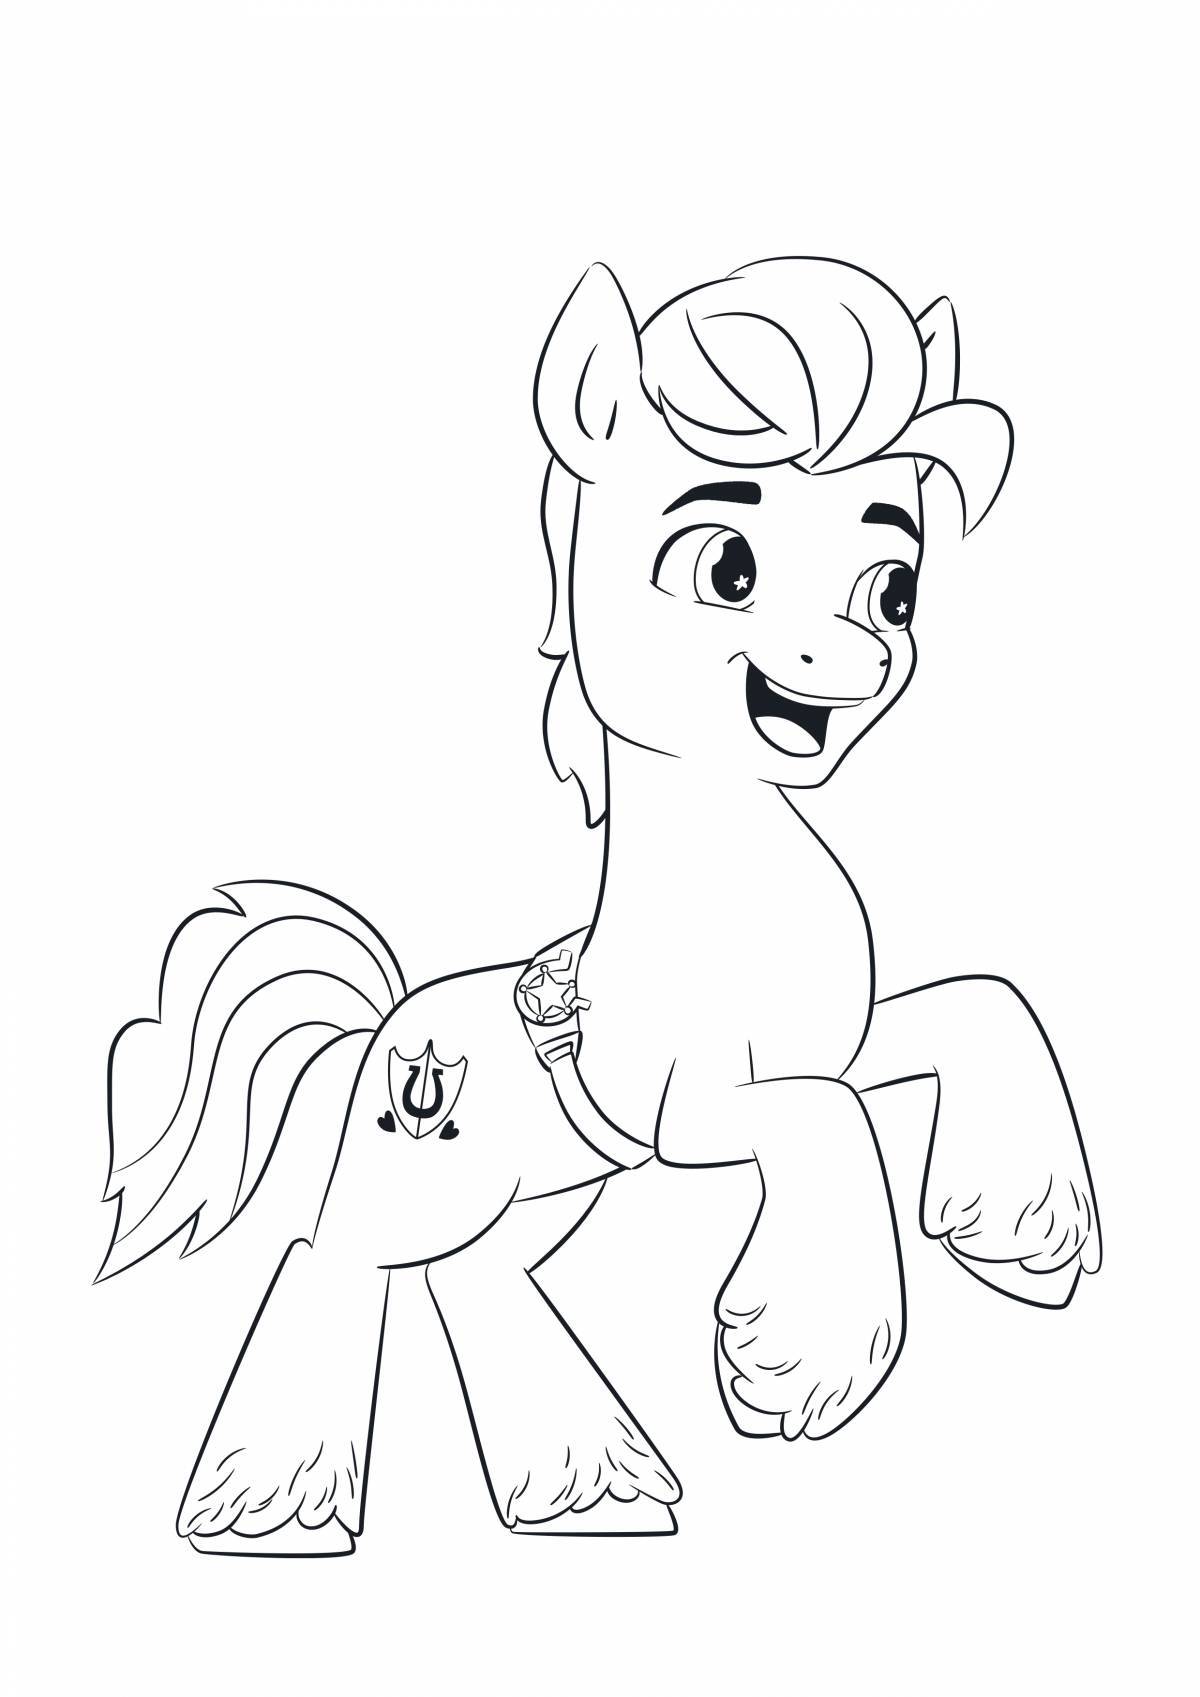 Fairy new generation pony coloring page